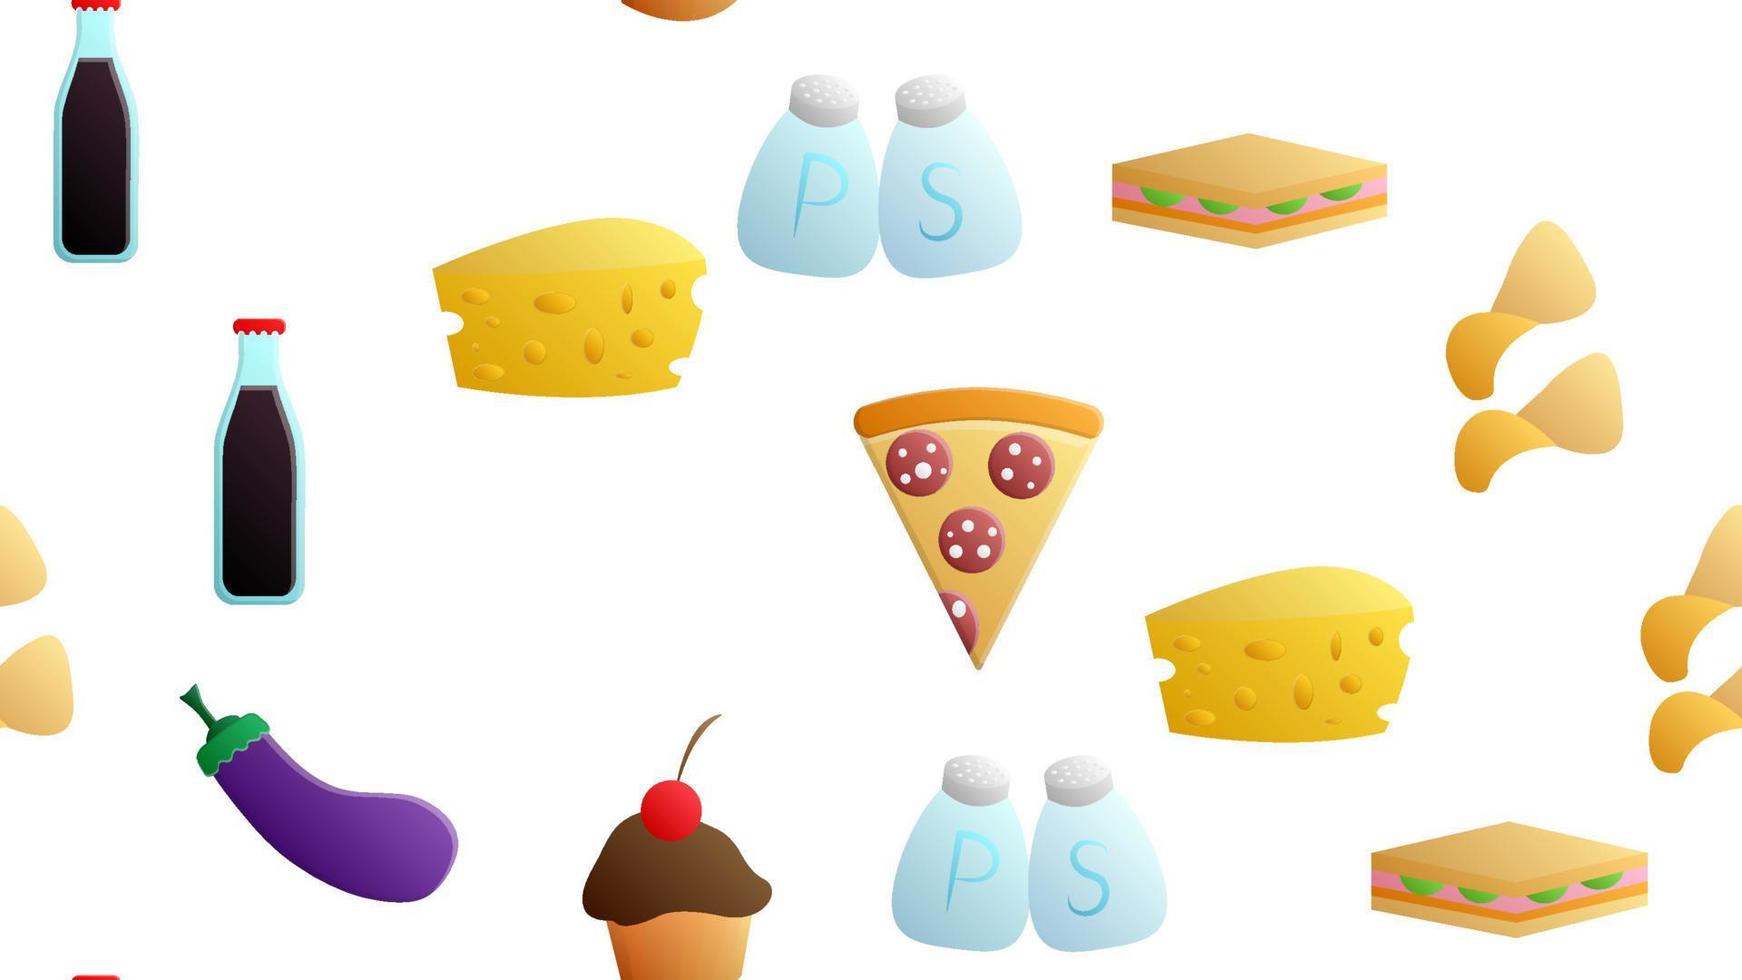 Endless white seamless pattern of delicious food and snack items icons set for restaurant bar cafe chips, cheese, eggplant, soda, salt and pepper, cupcake, pizza, sandwich. The background vector